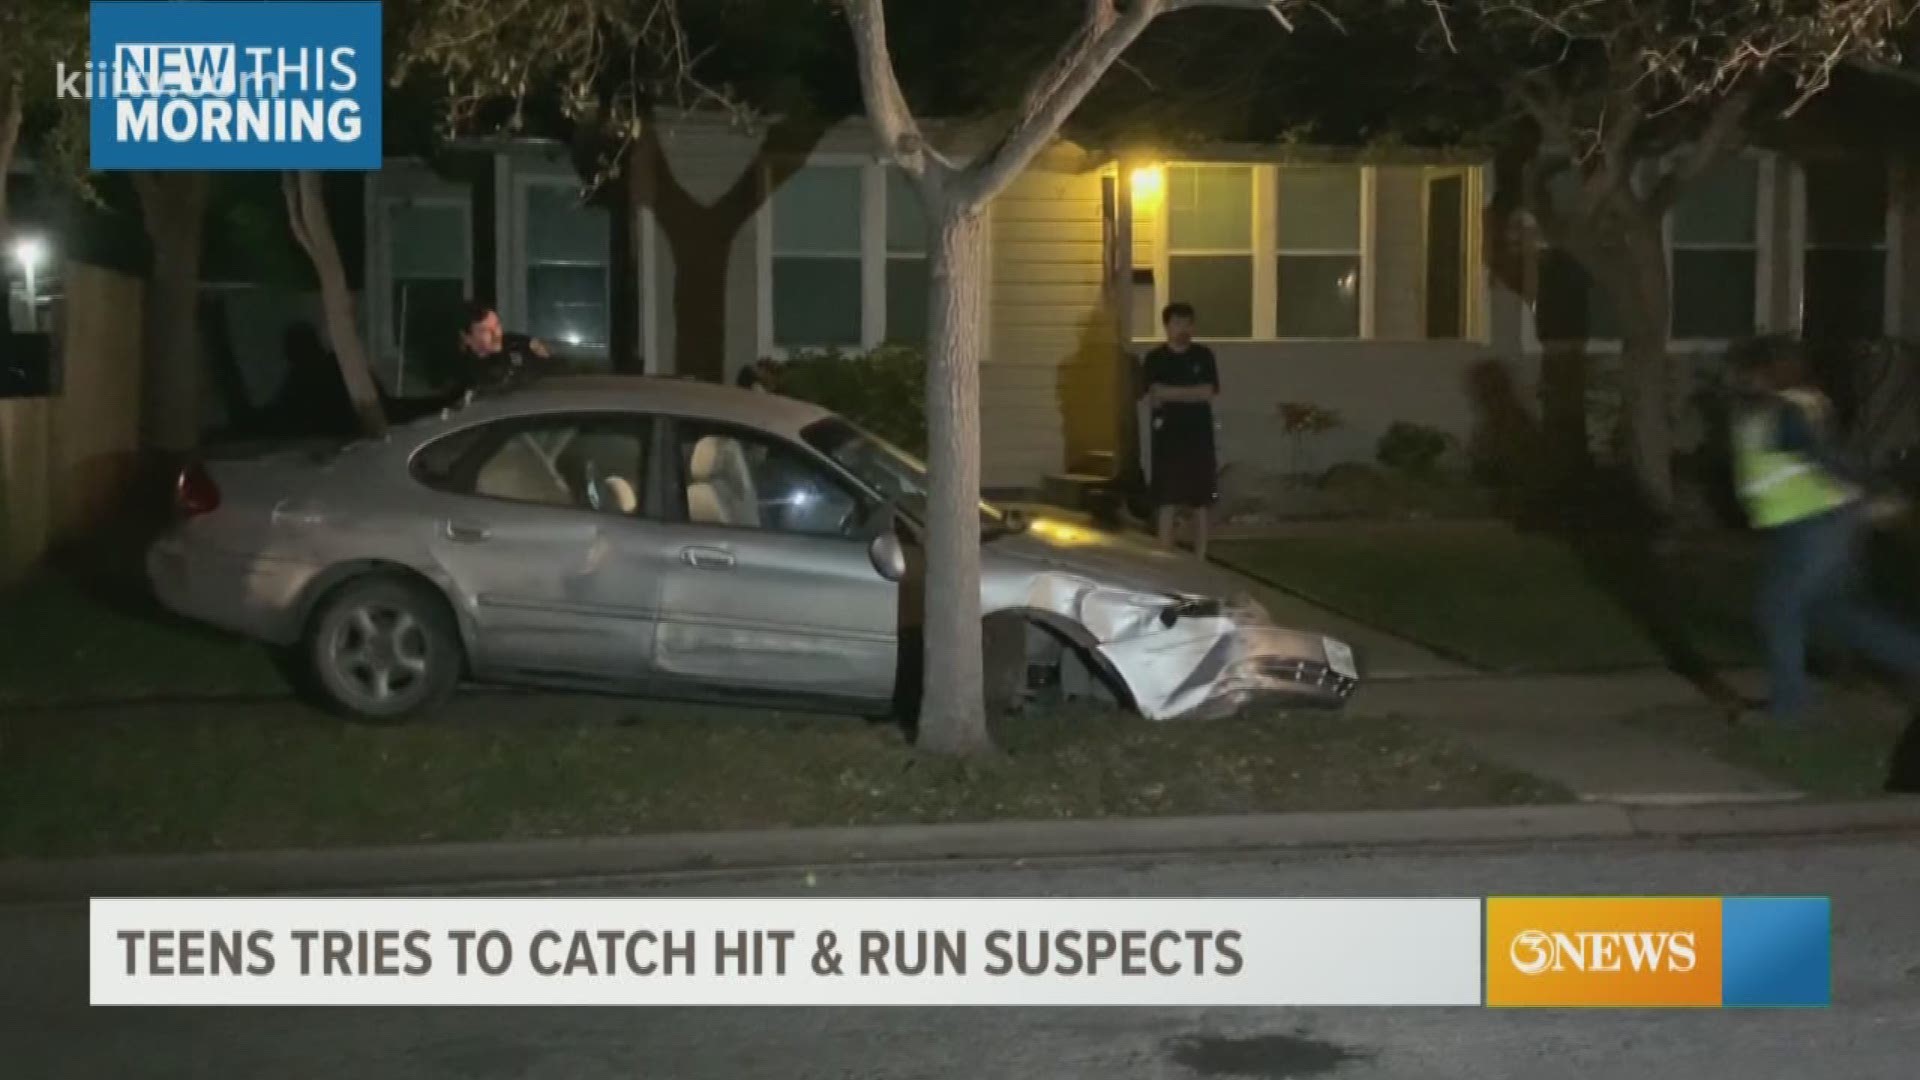 Corpus Christi police are looking for the people responsible for a hit-and-run that left three vehicles badly damaged early Thursday morning.